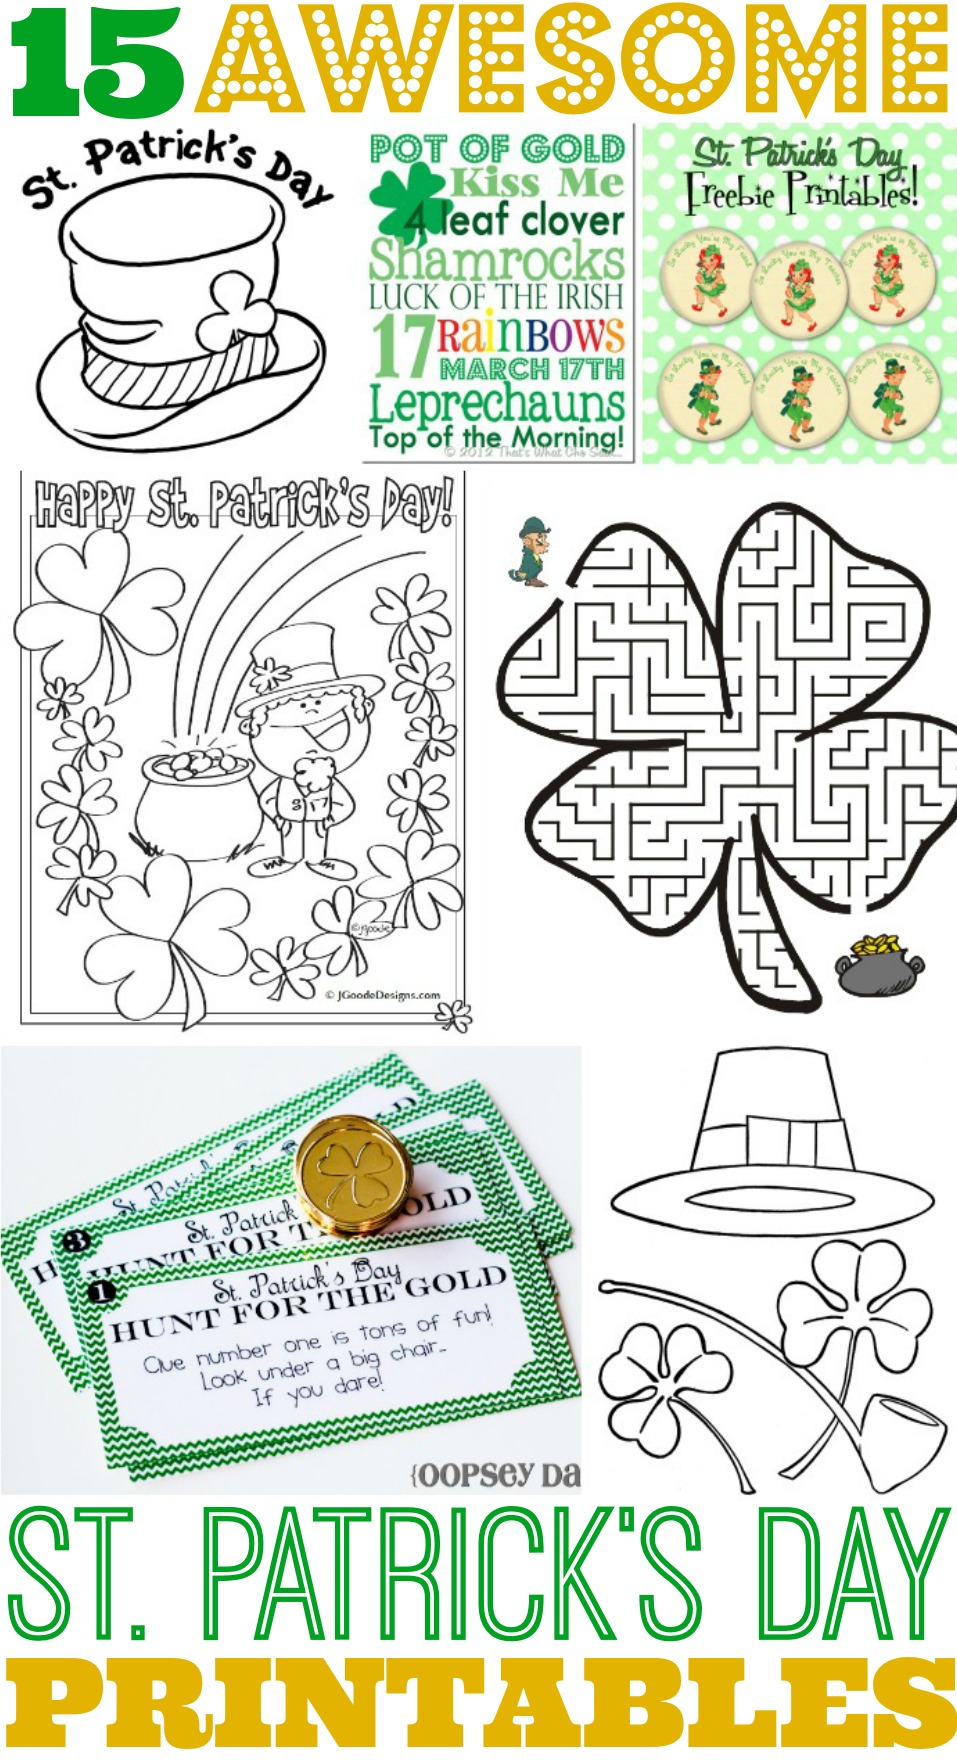 Awesome st patricks day free printables for kids